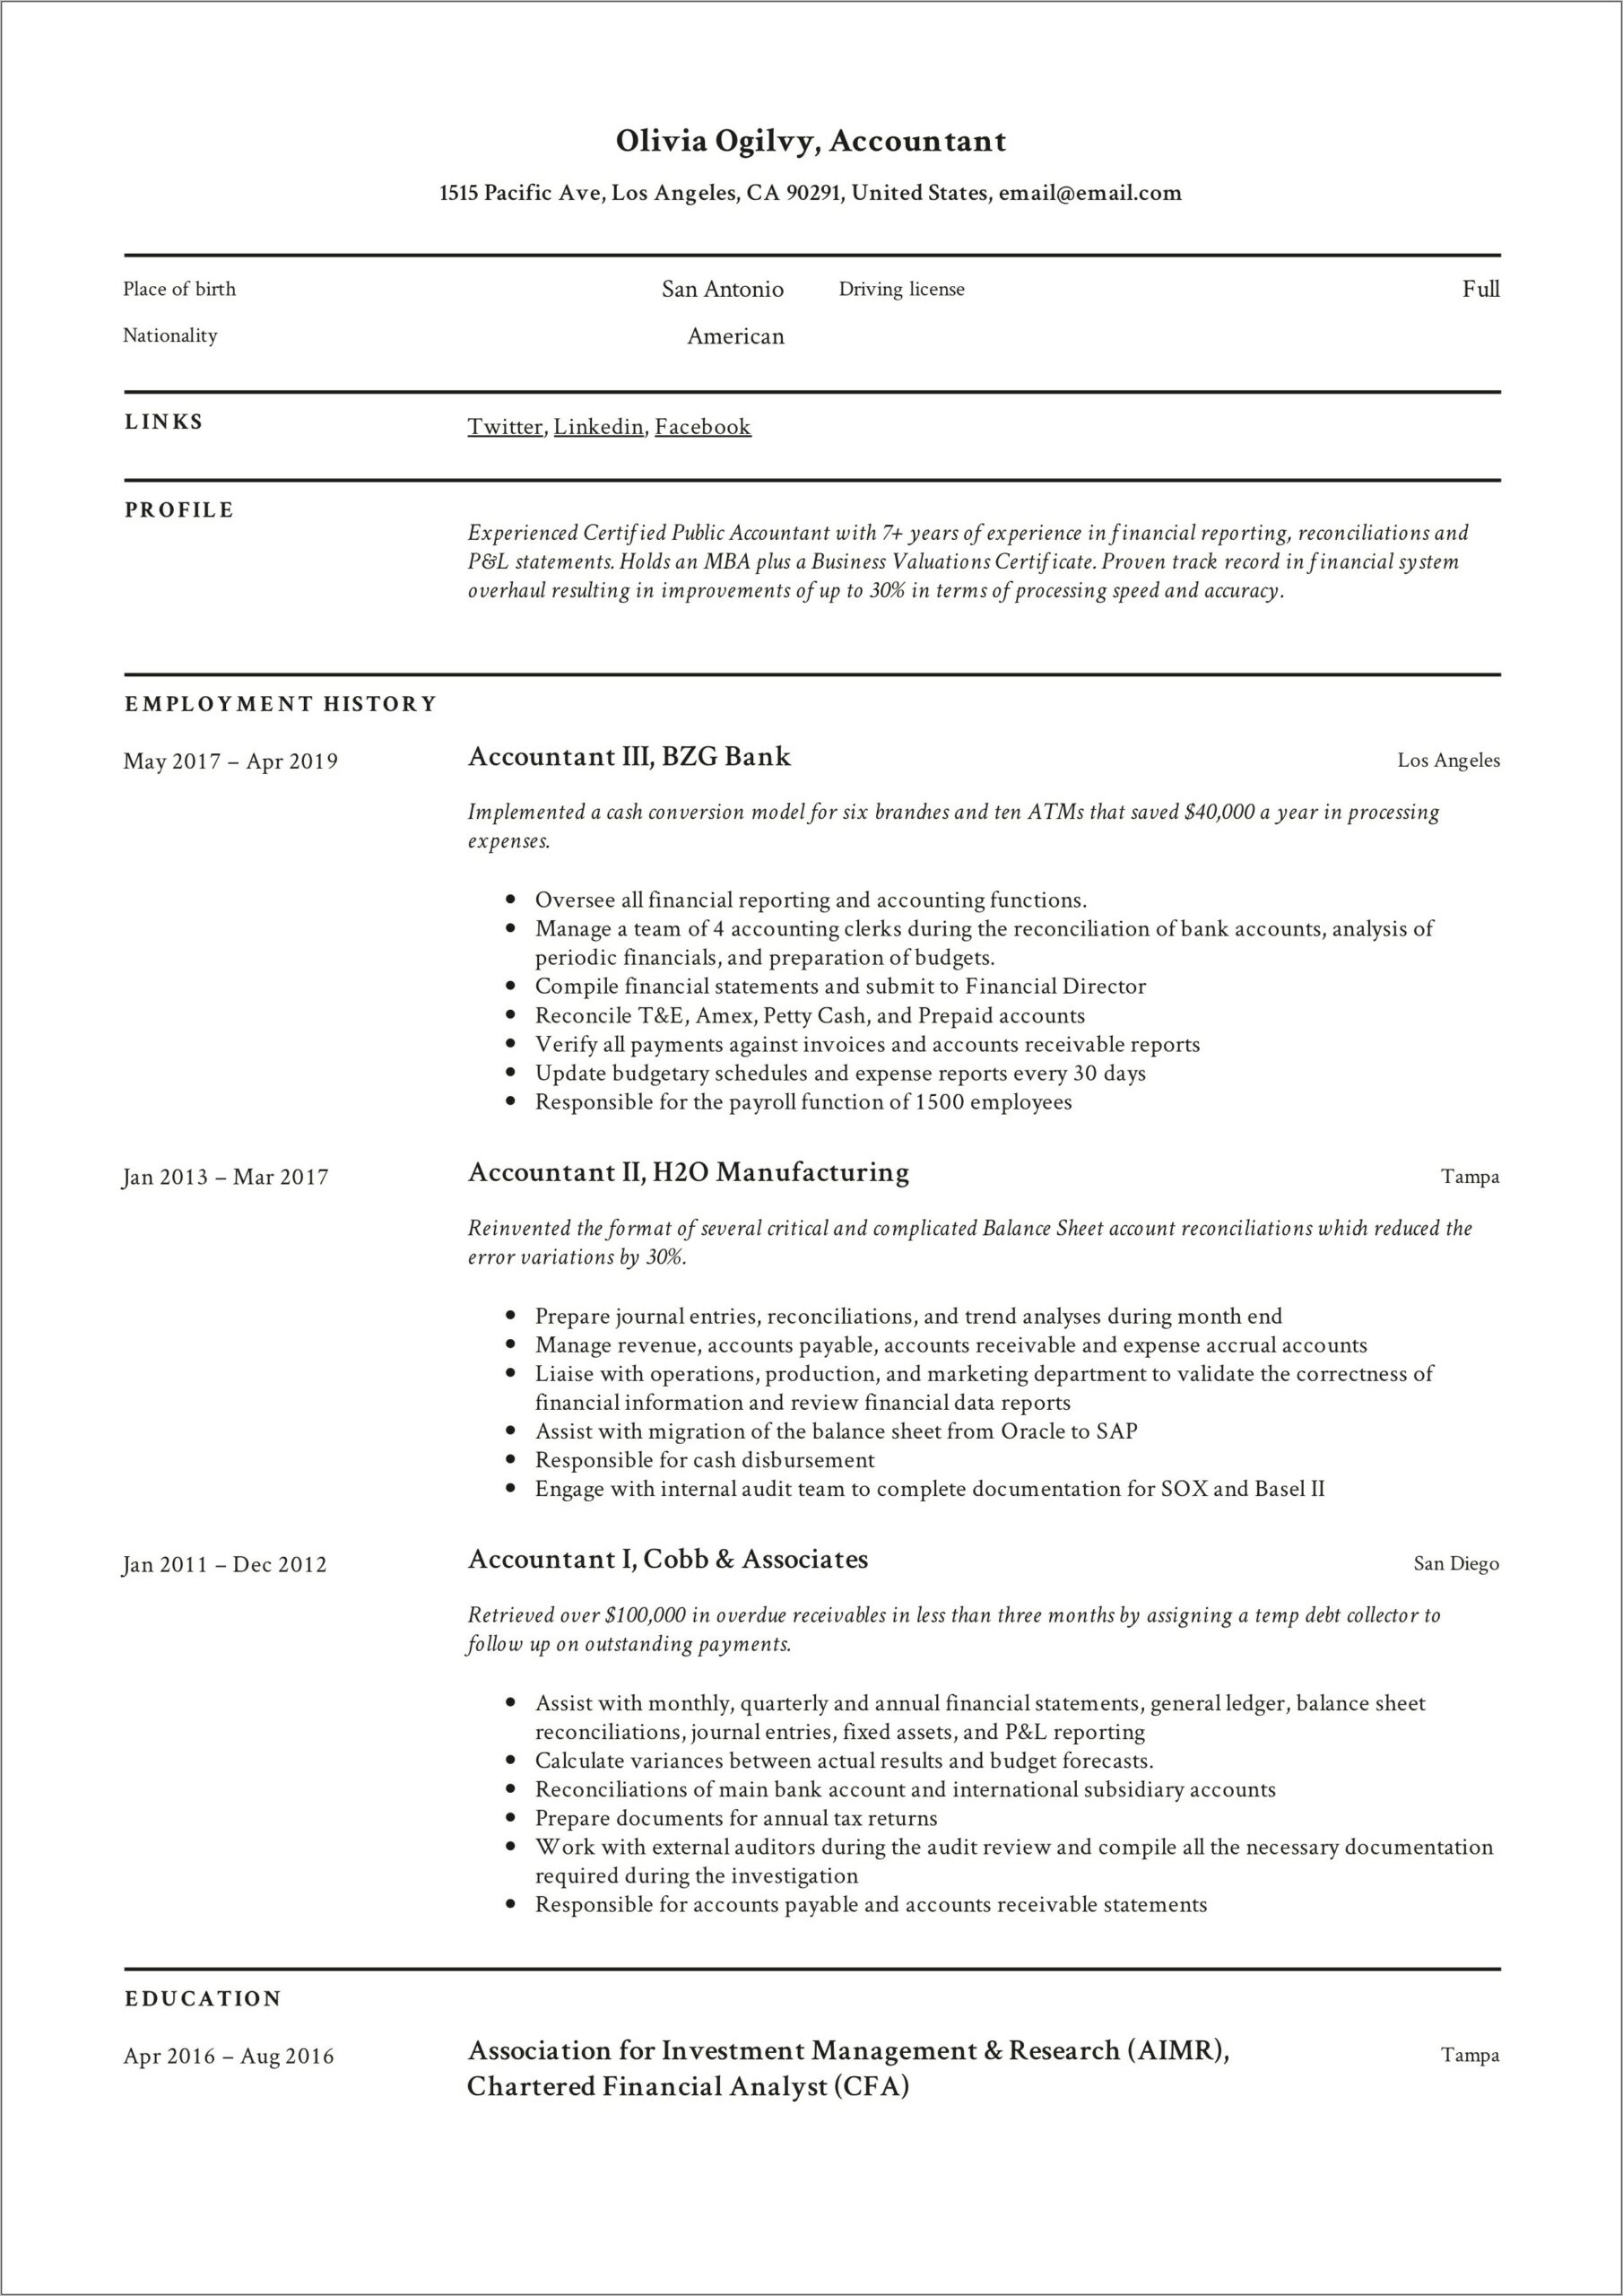 Resume Objective For Junior Accountant